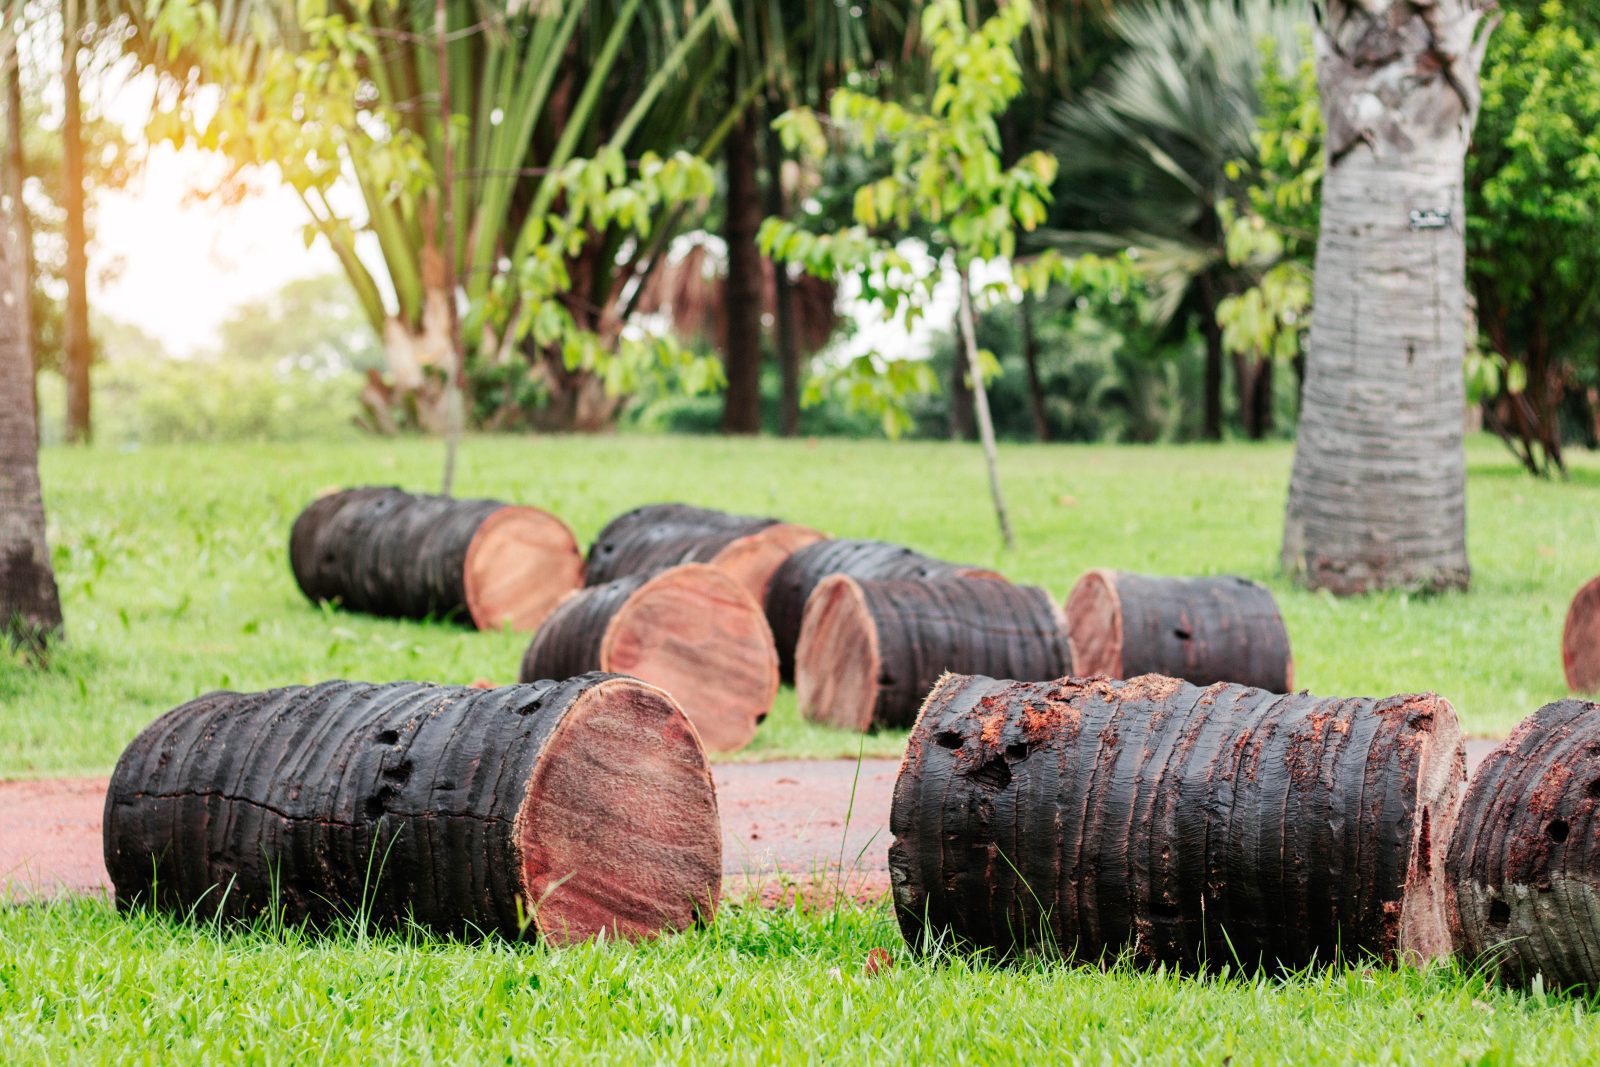 Neighbor cut down my tree - palm trees are cut on lawns P3YELWL